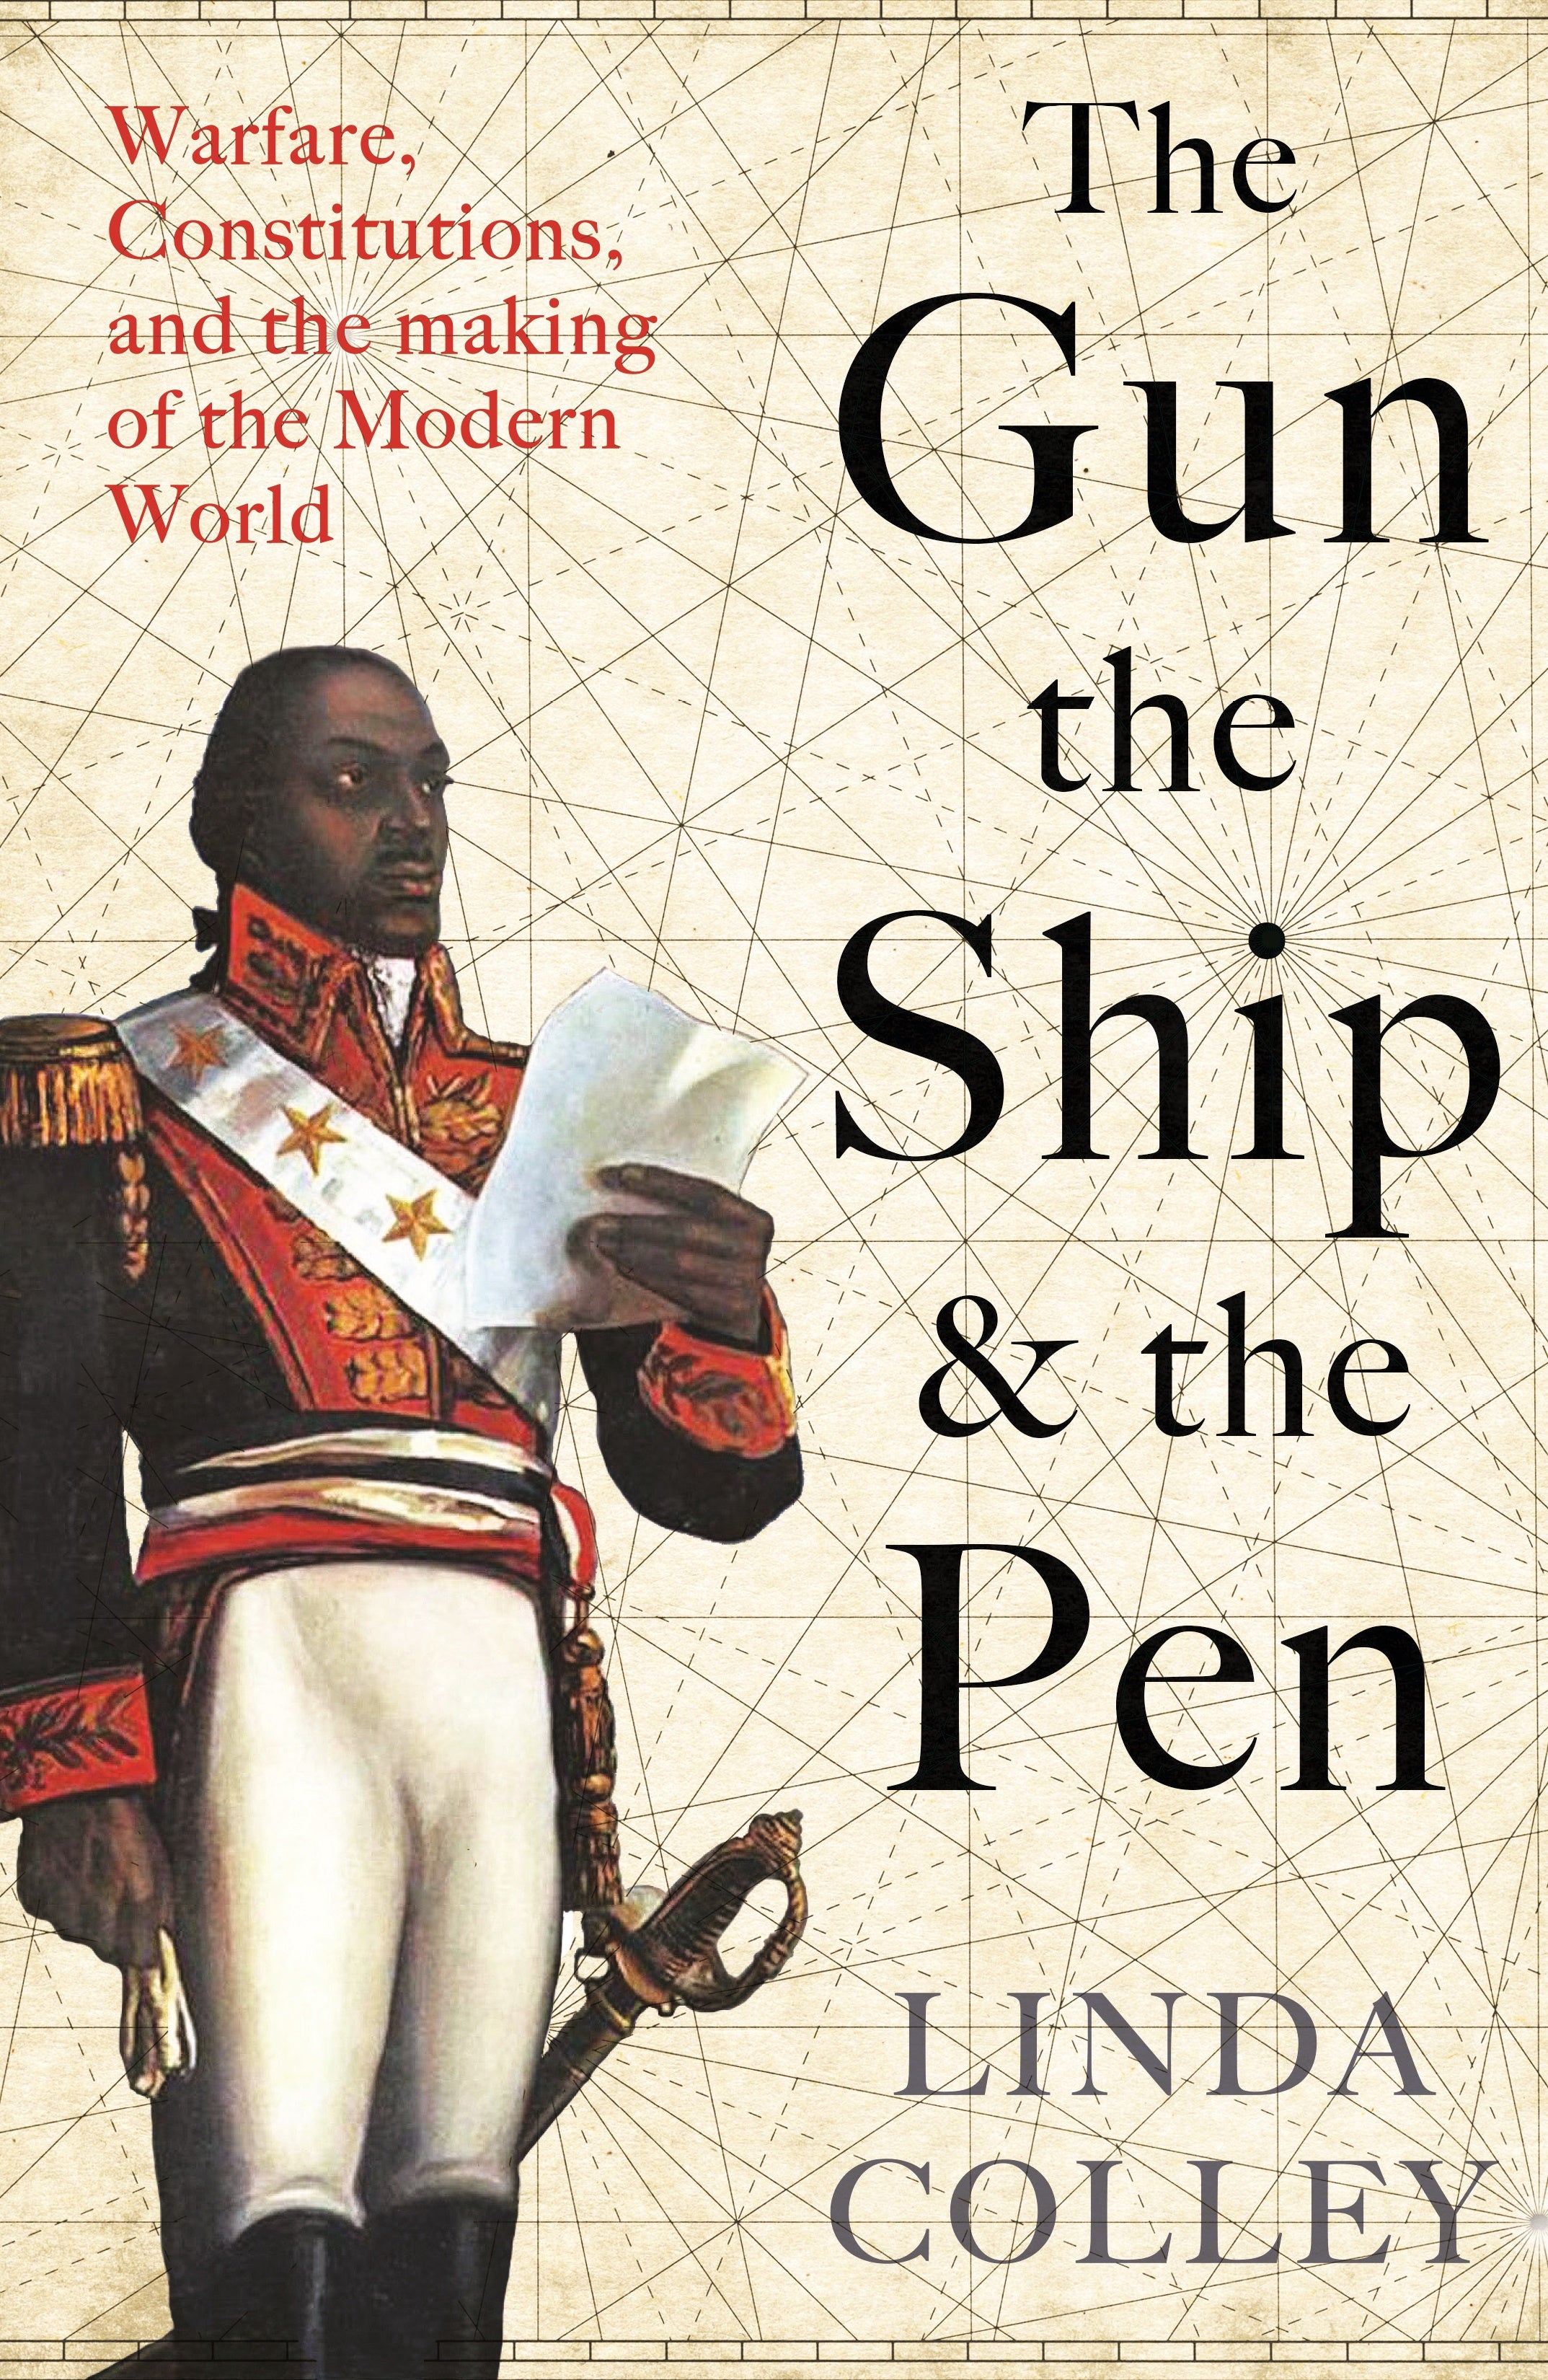 The Gun, the Ship and the Pen, by Linda Colley in Hard Back $39.99